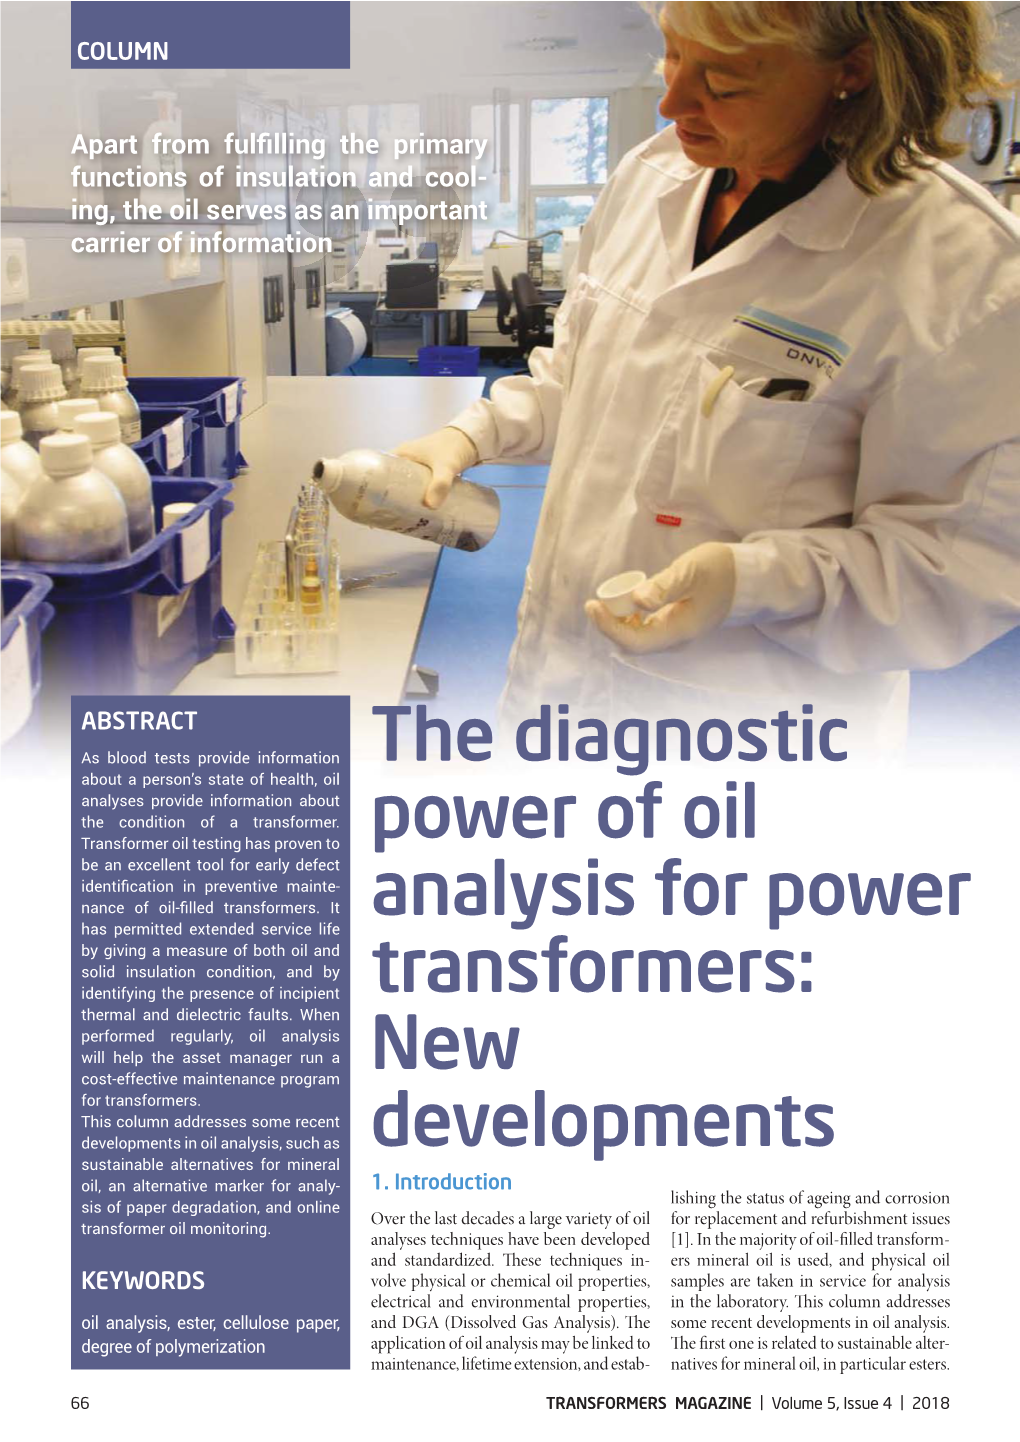 The Diagnostic Power of Oil Analysis for Power Transformers